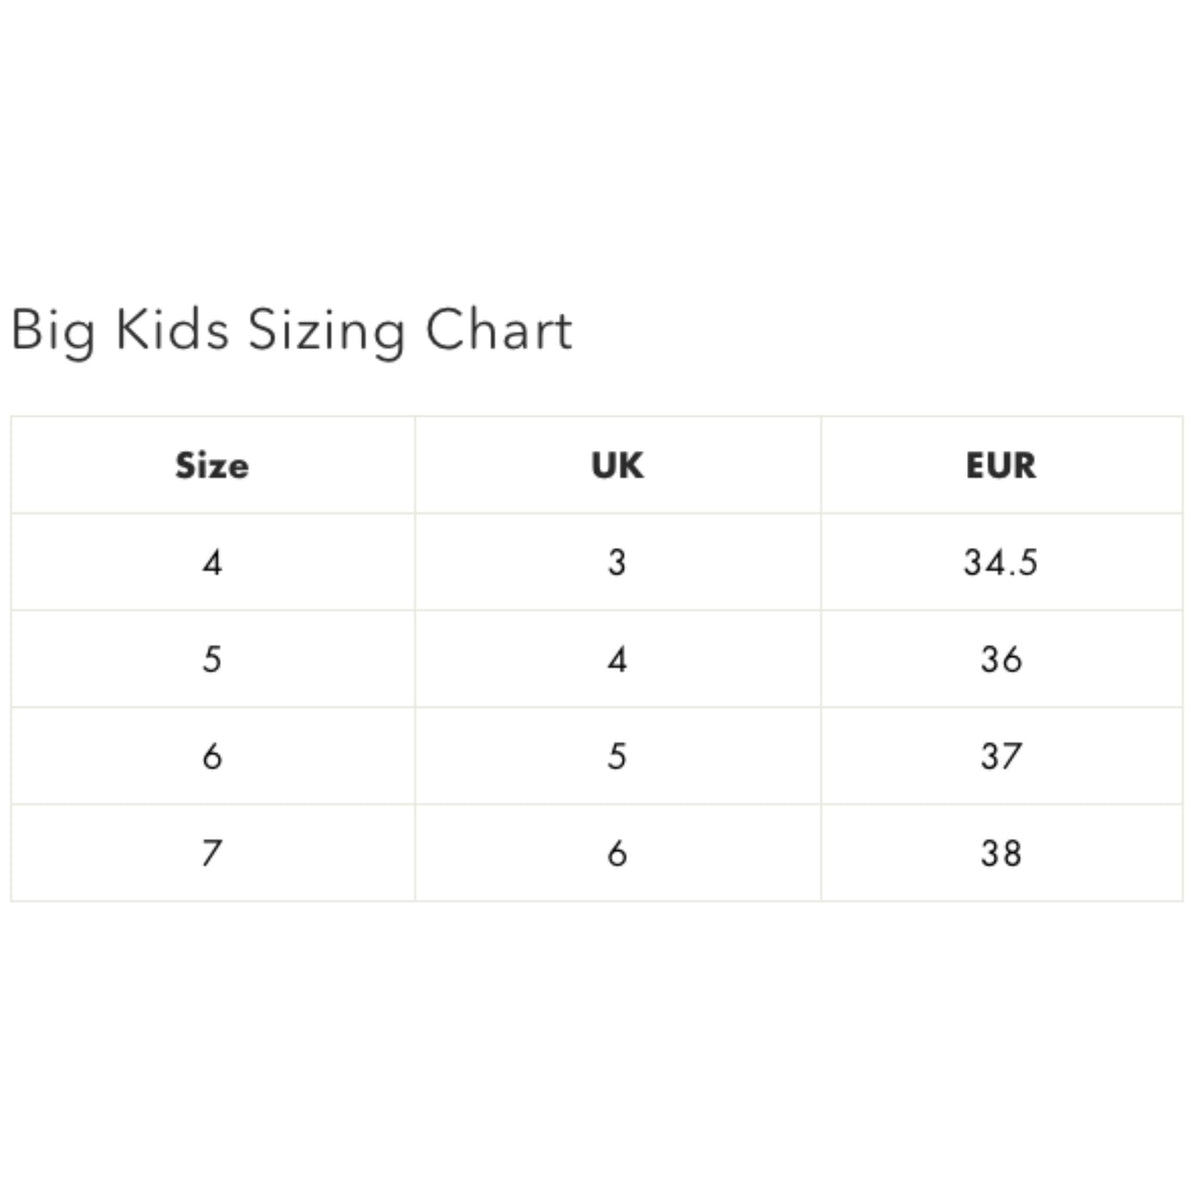 Sizing guide for bigger kids.